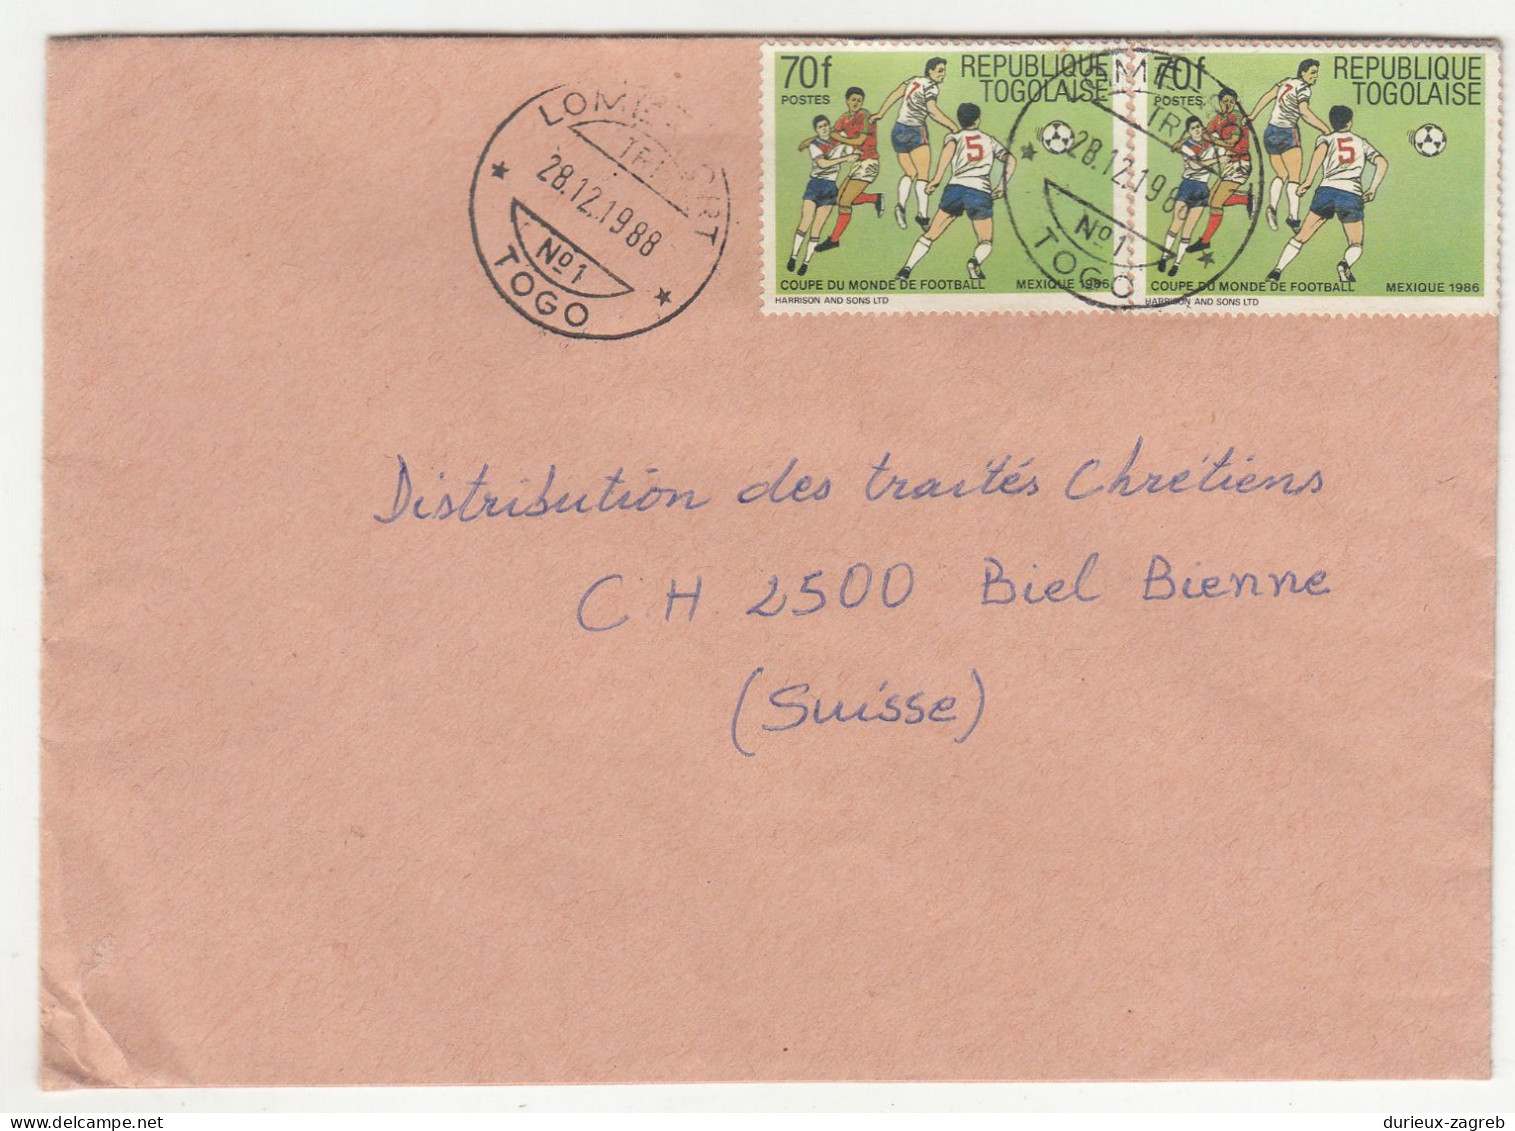 Republique Togolaise 32 letter covers posted 1988 to Switzerland b240510